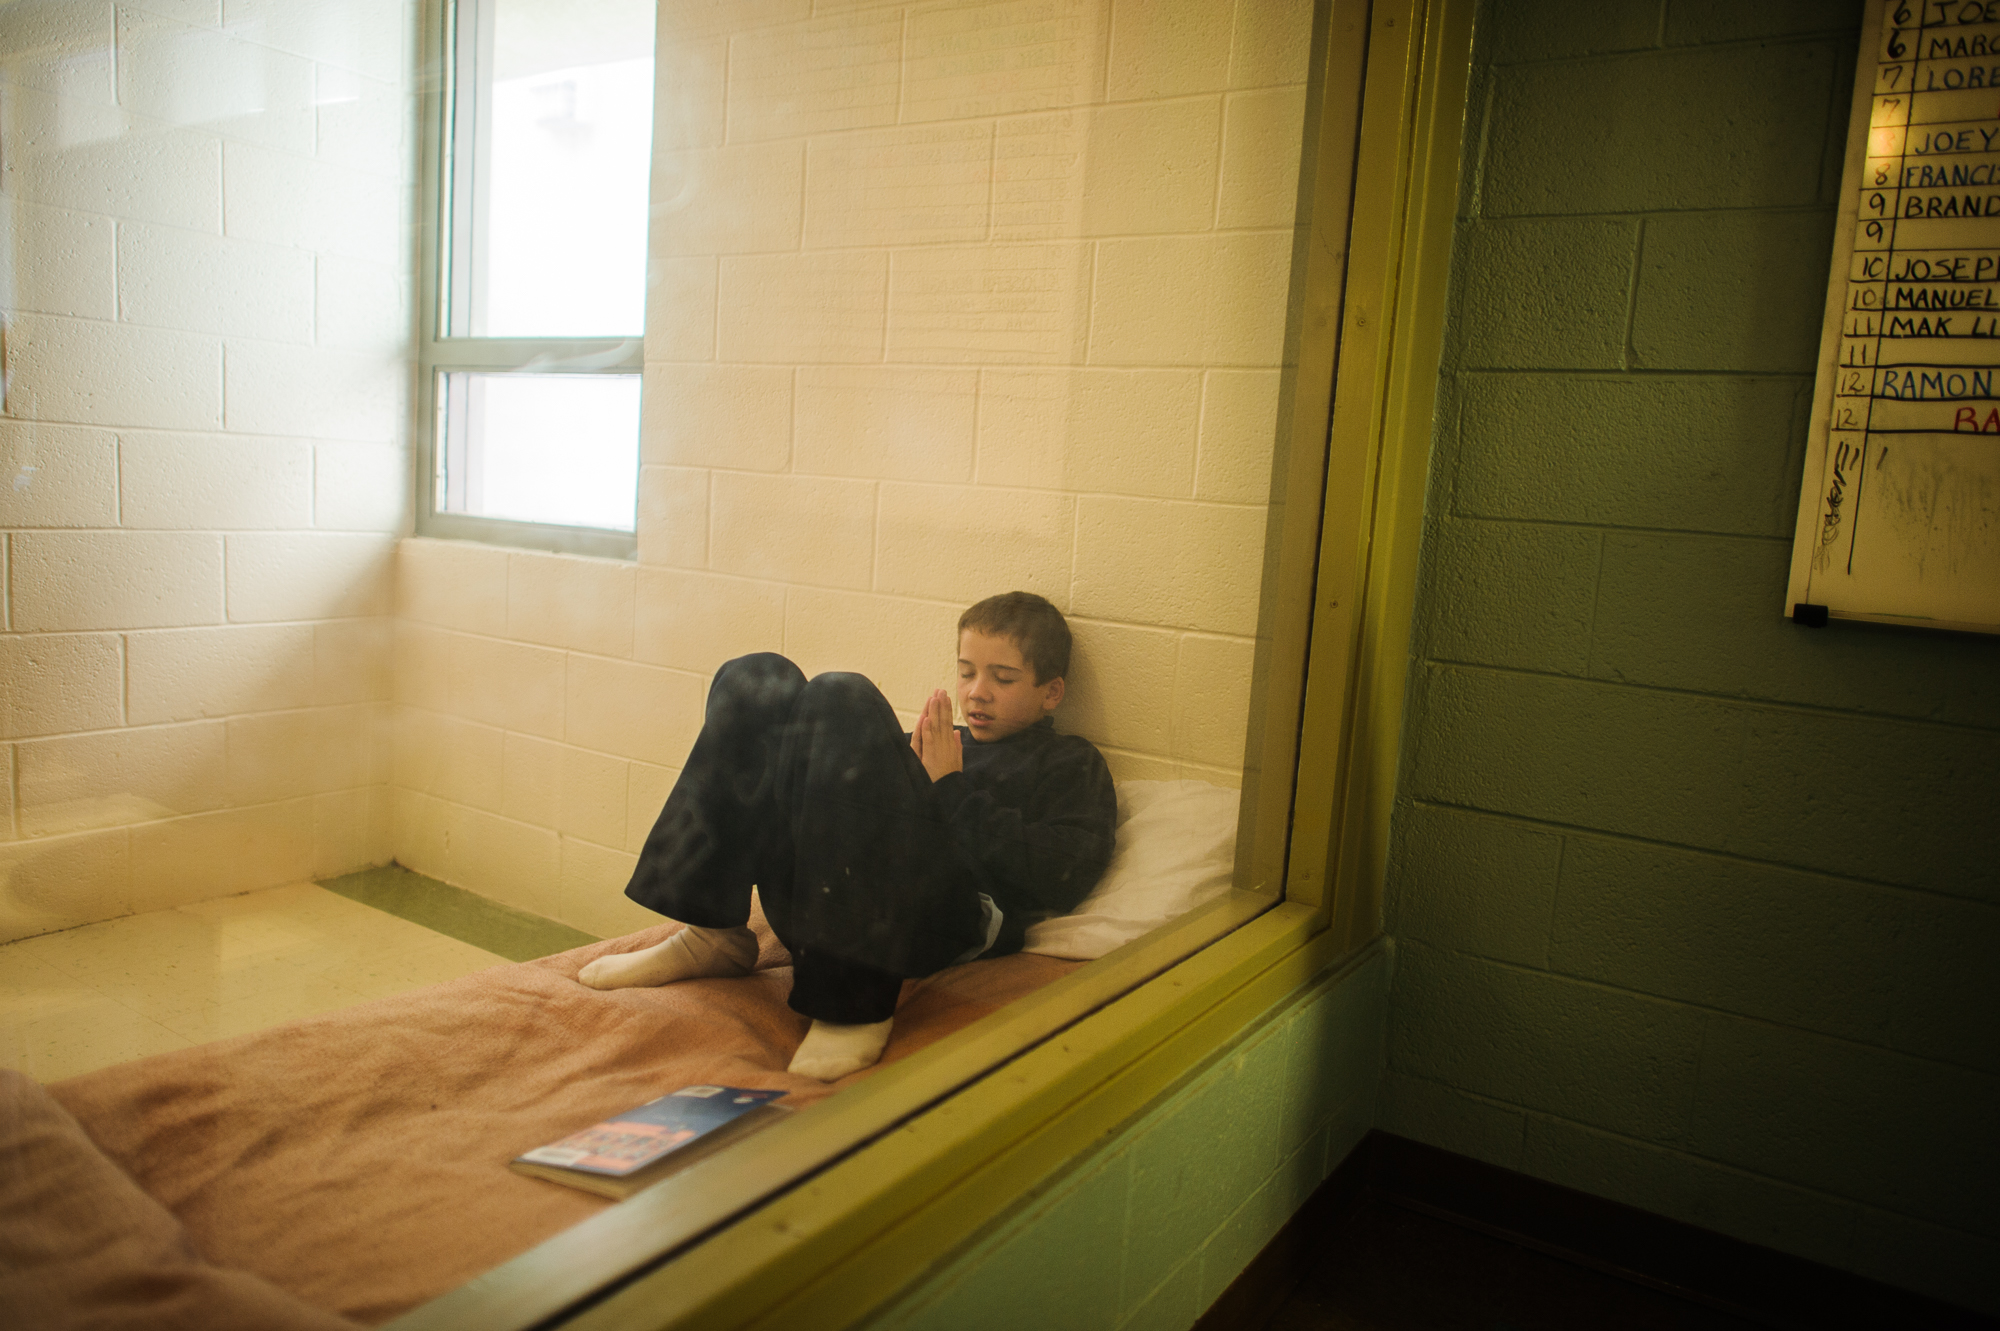  Vinny, age 13, prays inside his cell at the juvenile detention center, 2012. 